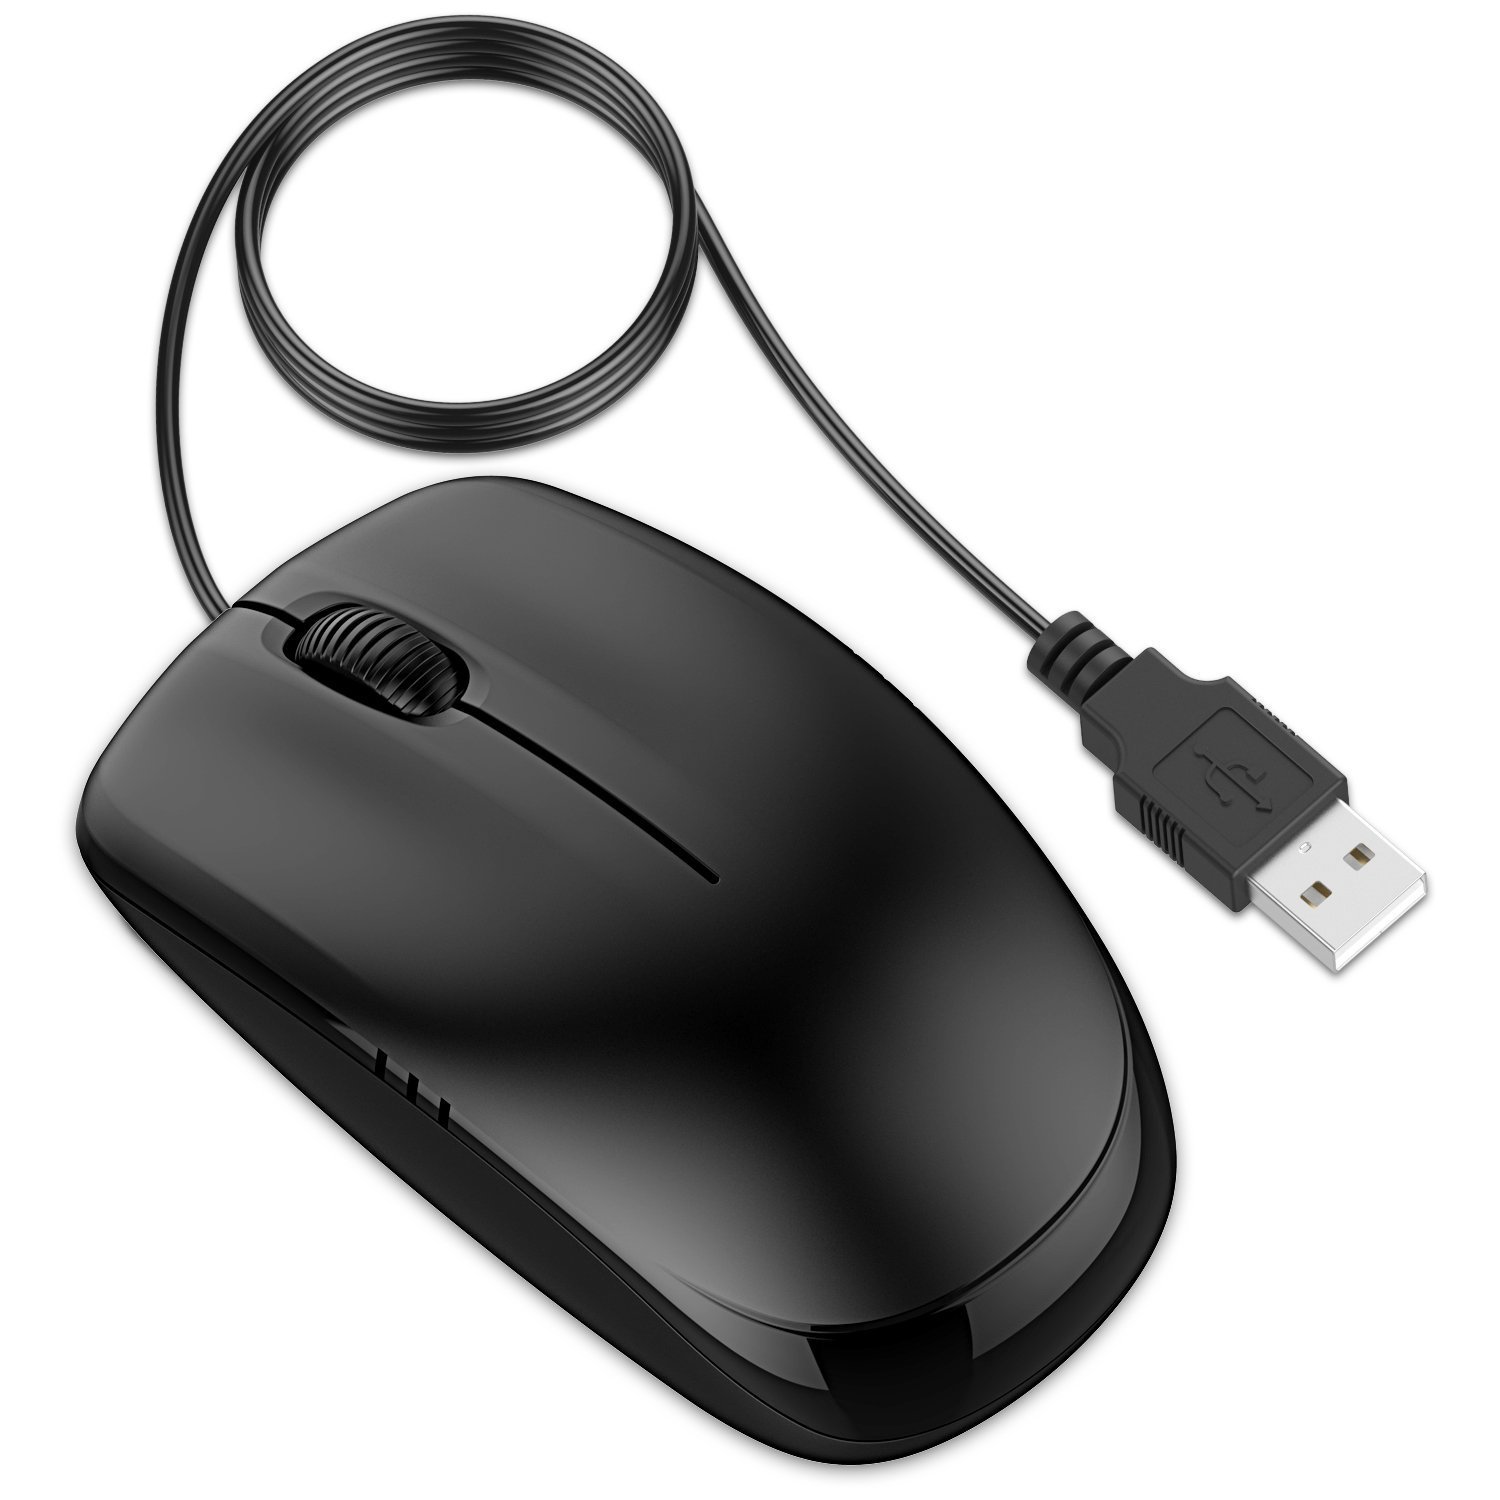 USB Wired Optical Mouse With Scroll Wheel